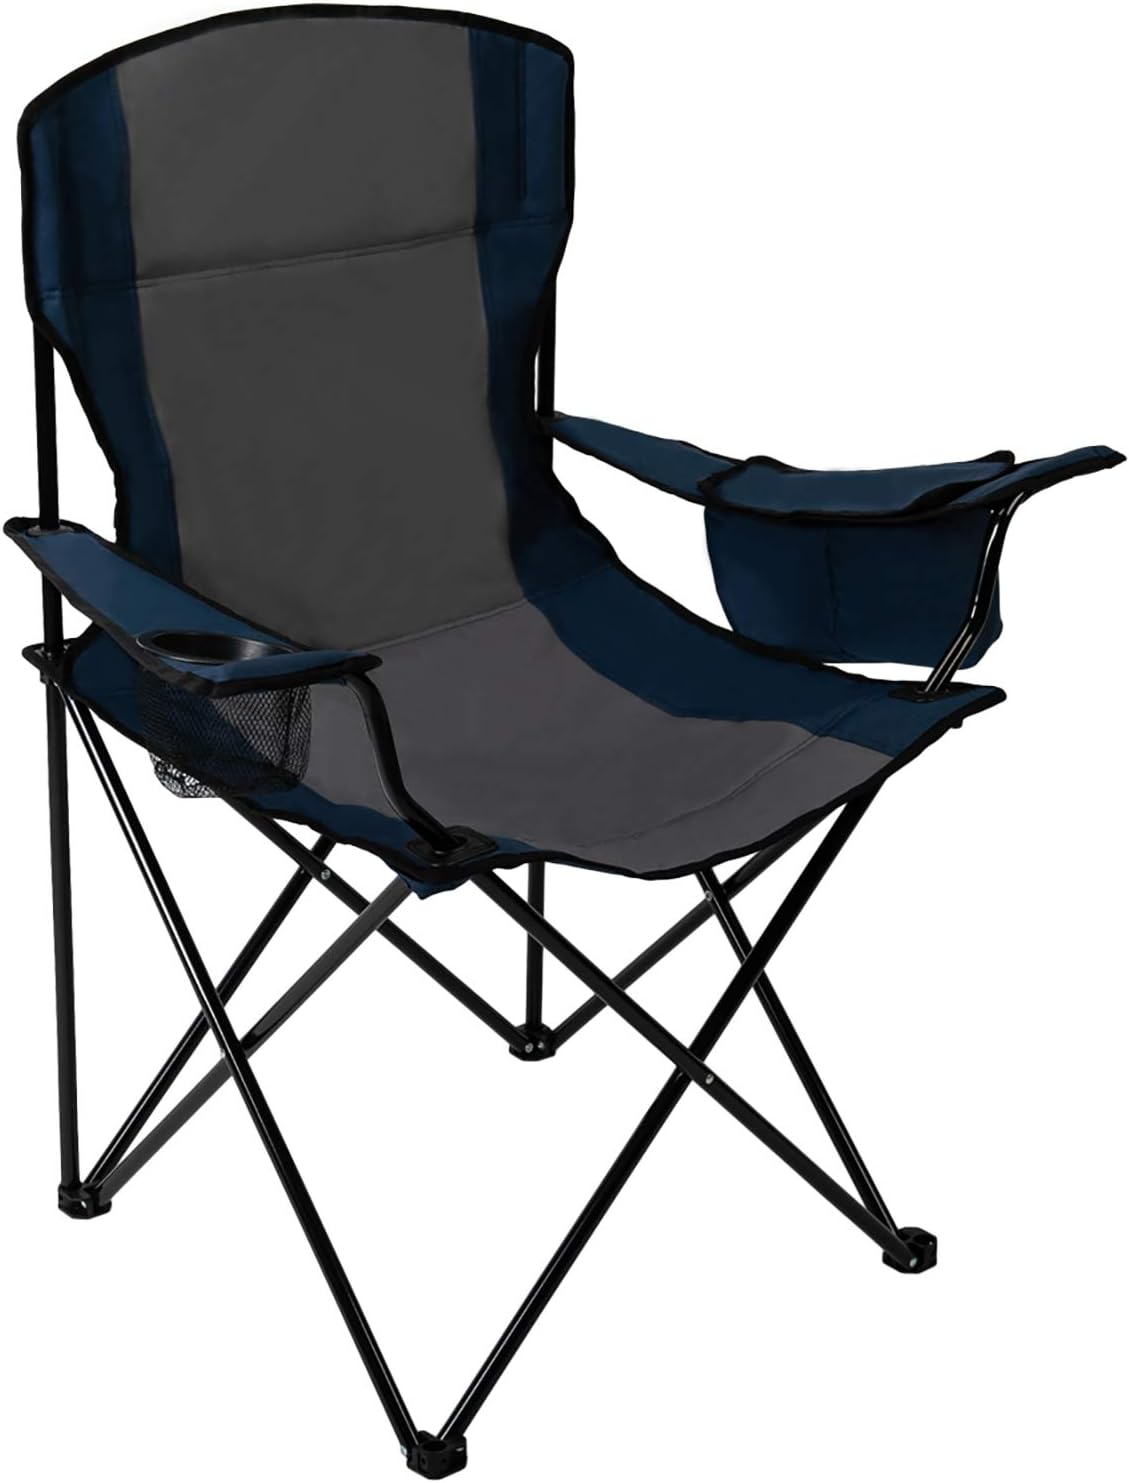 Includes Carry Bag Pacific Pass Lightweight Portable Tripod Camp Chair